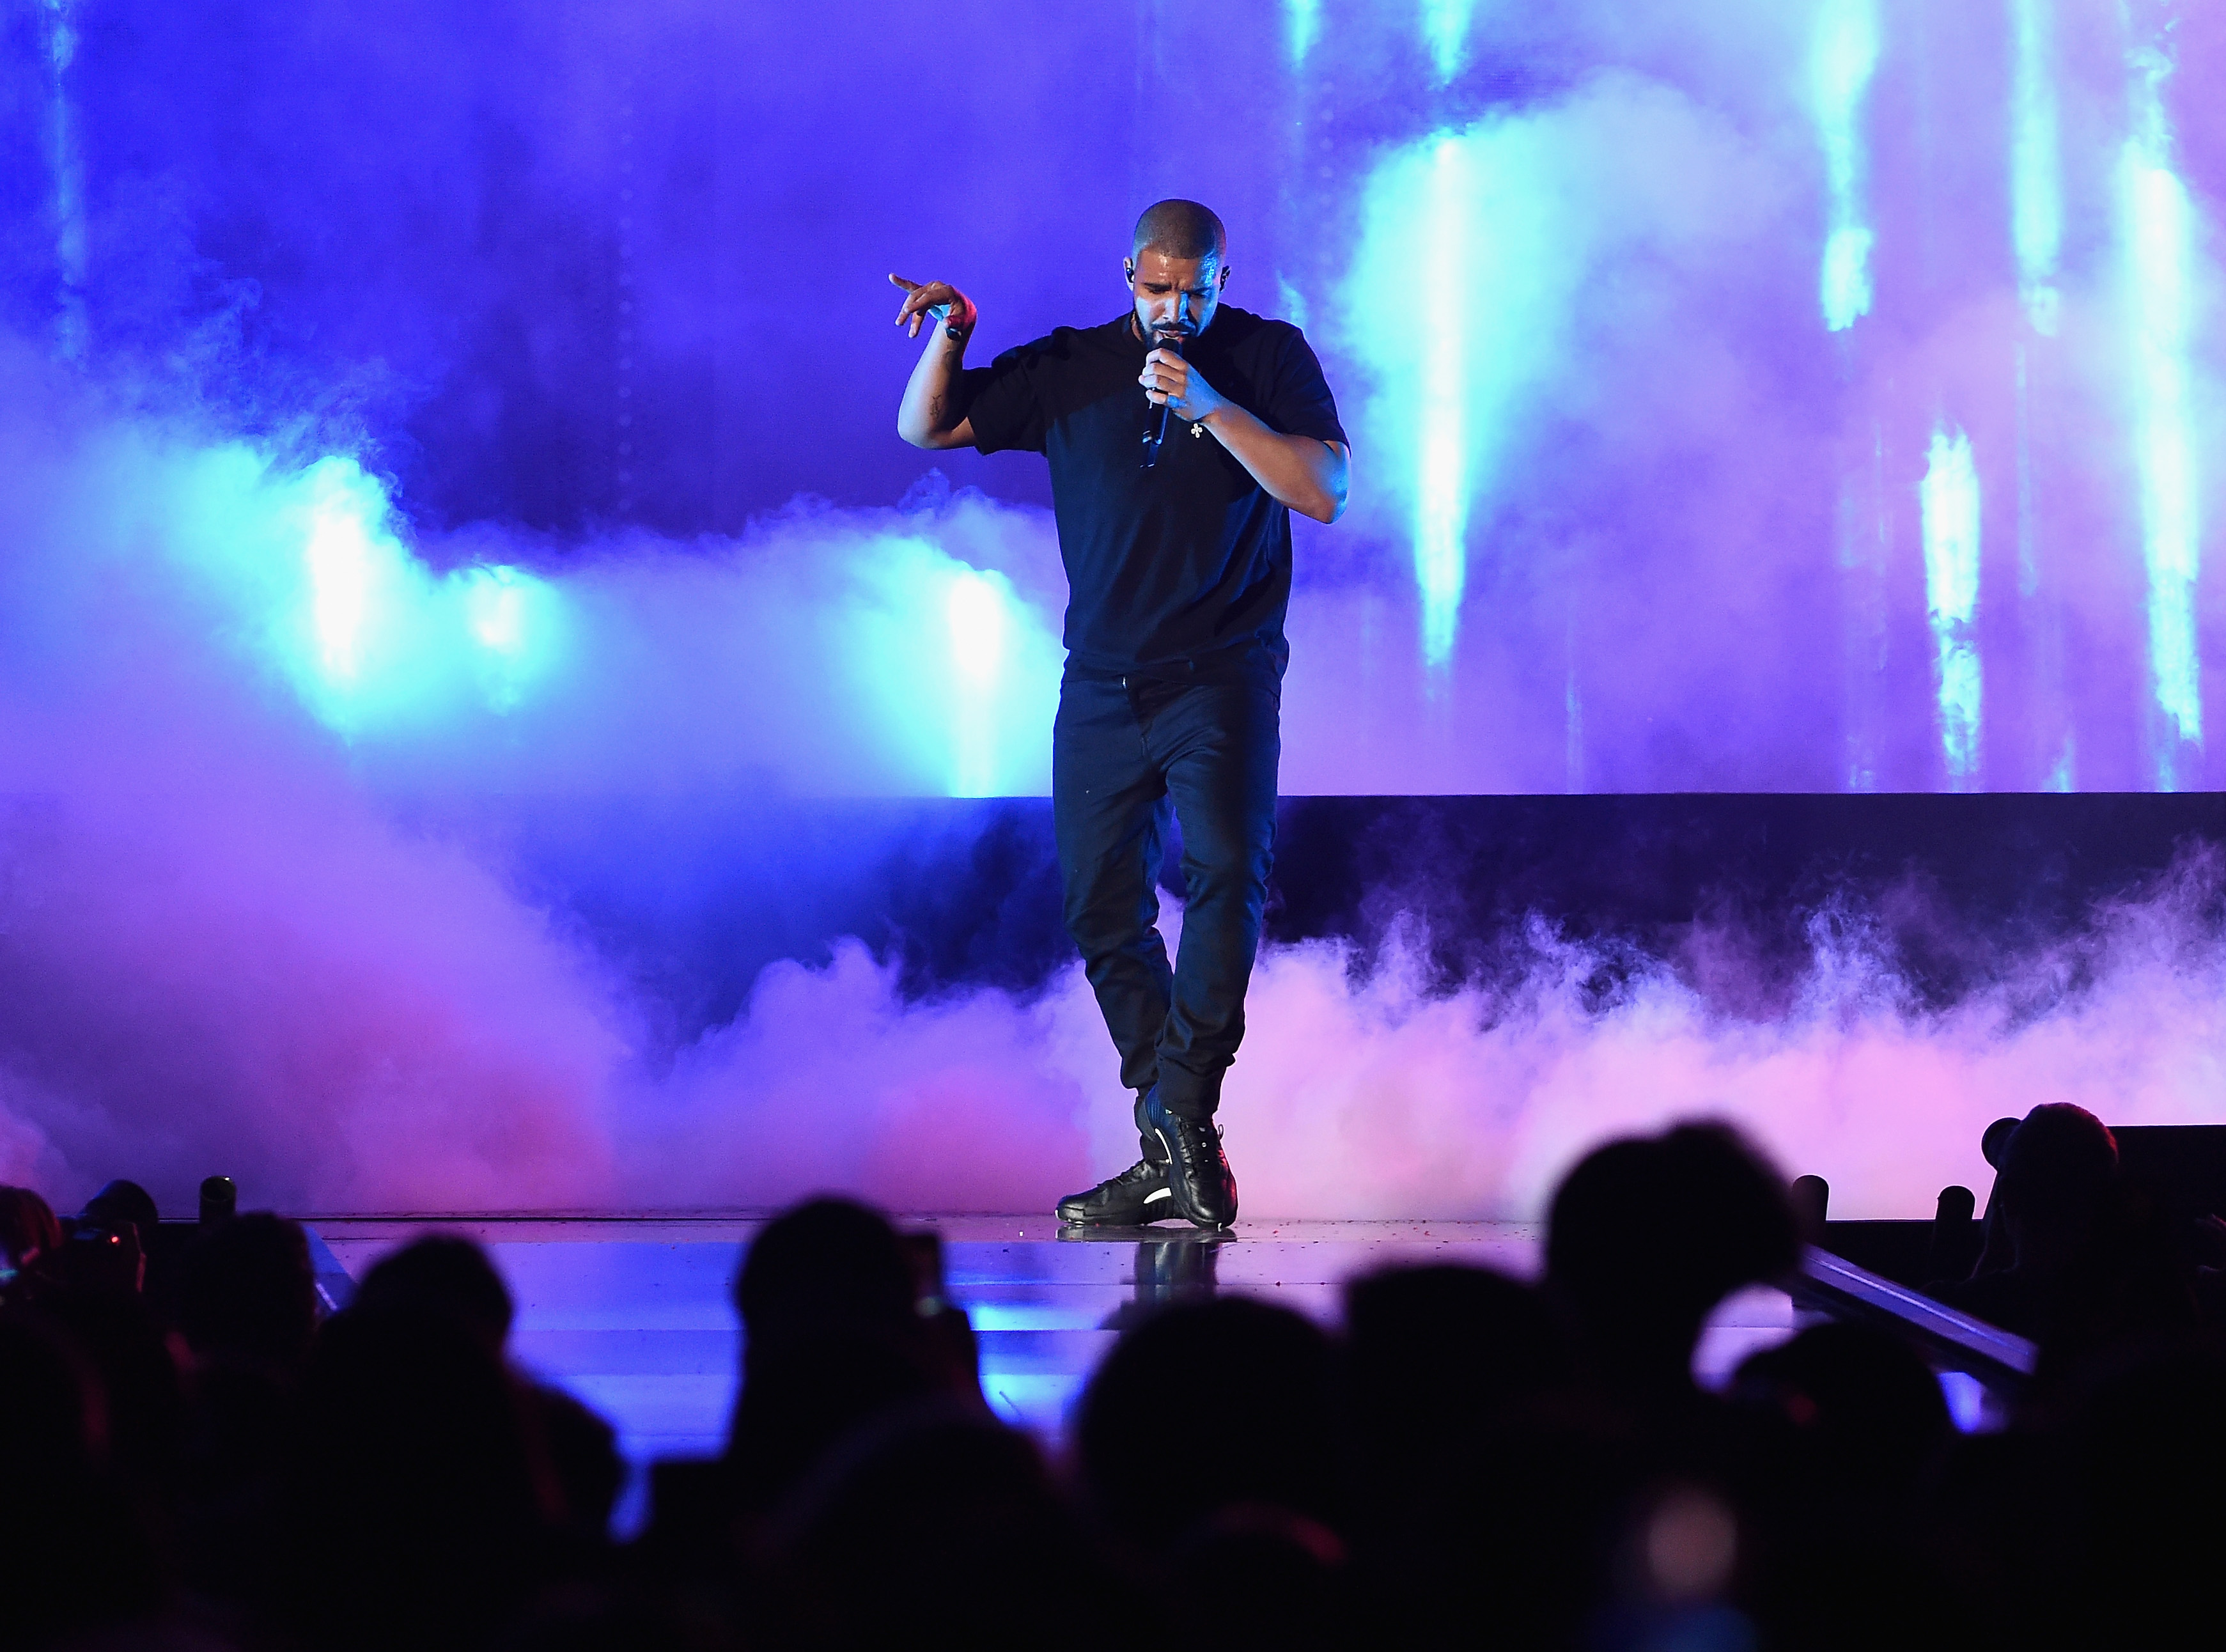 Drake performs onstage at the iHeartRadio Music Festival on September 23, 2016 in Las Vegas, Nevada. (Photo by Kevin Winter/Getty Images)